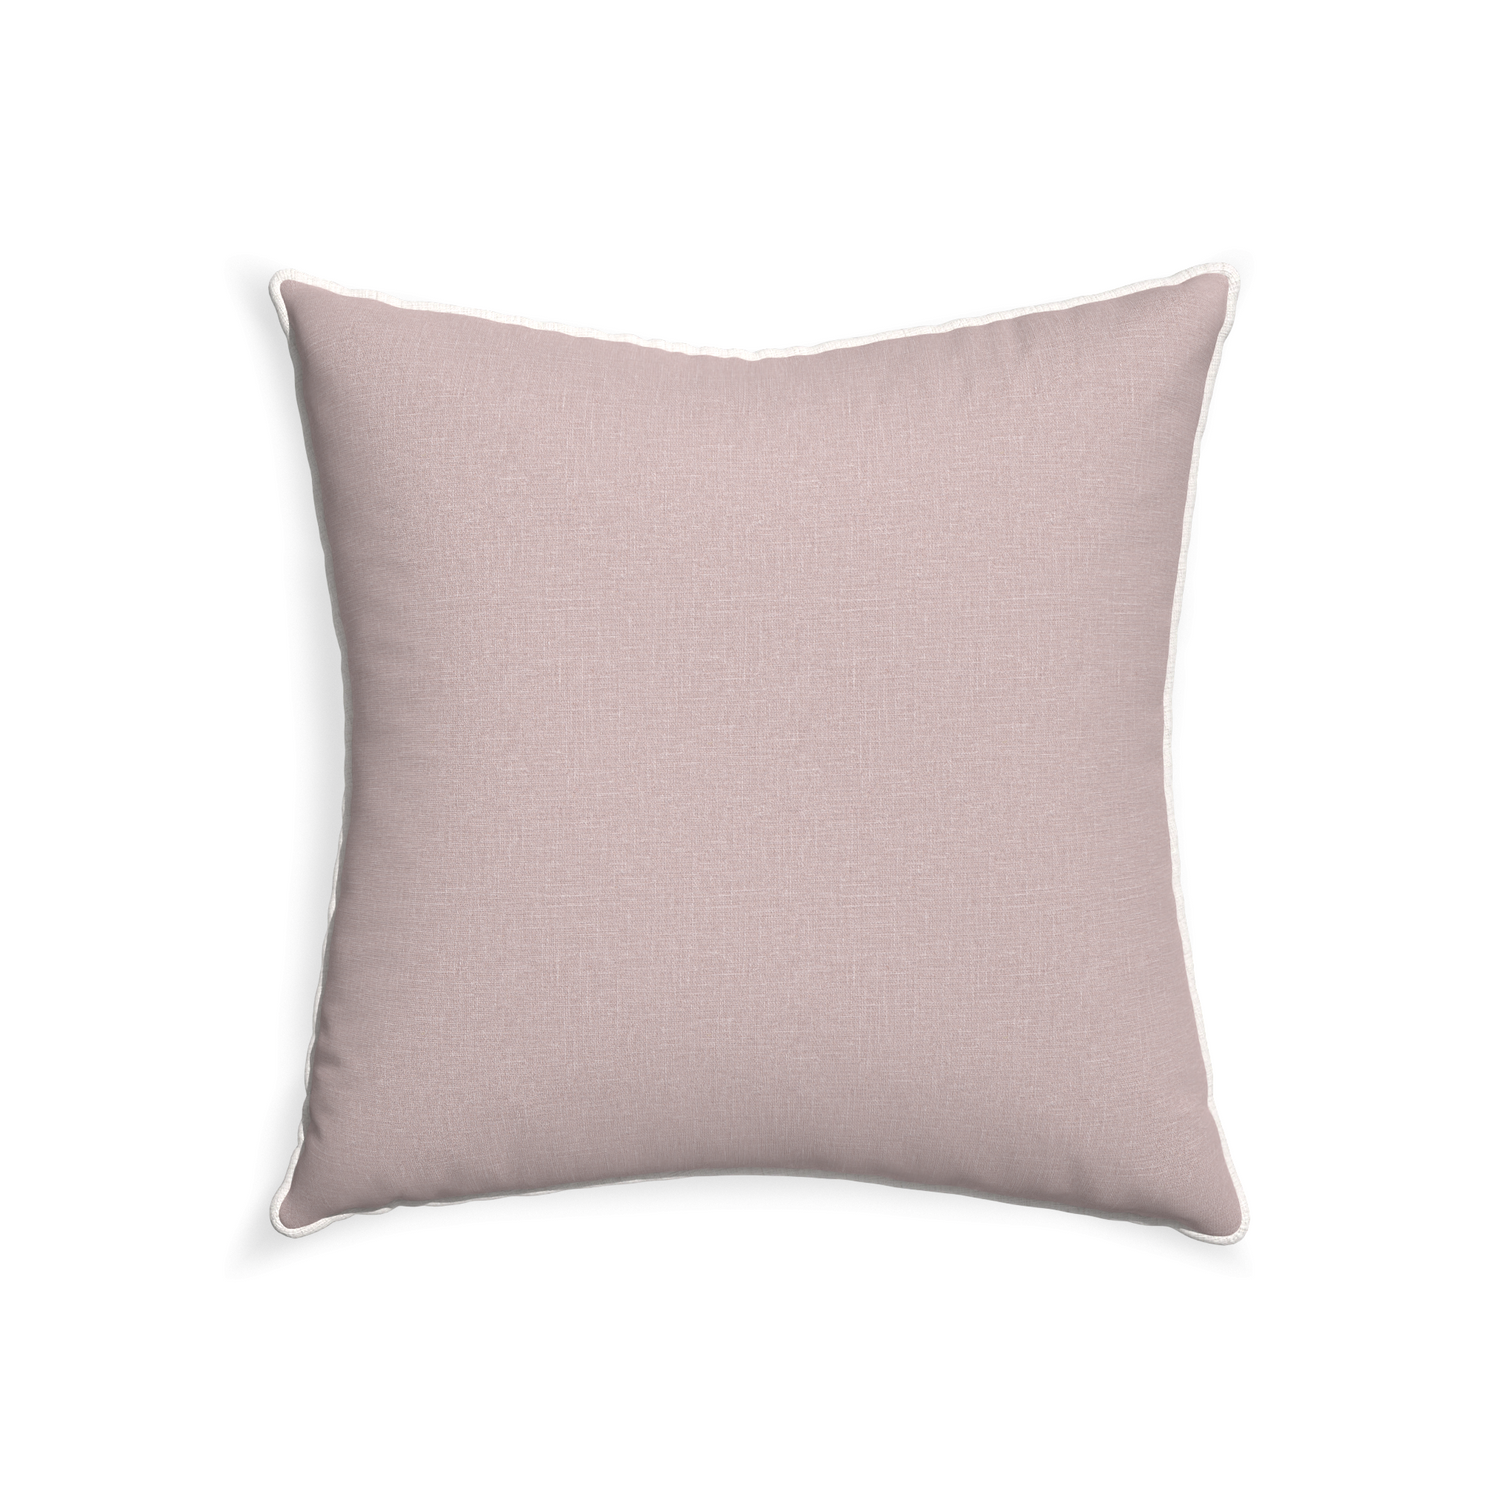 22-square orchid custom mauve pinkpillow with snow piping on white background